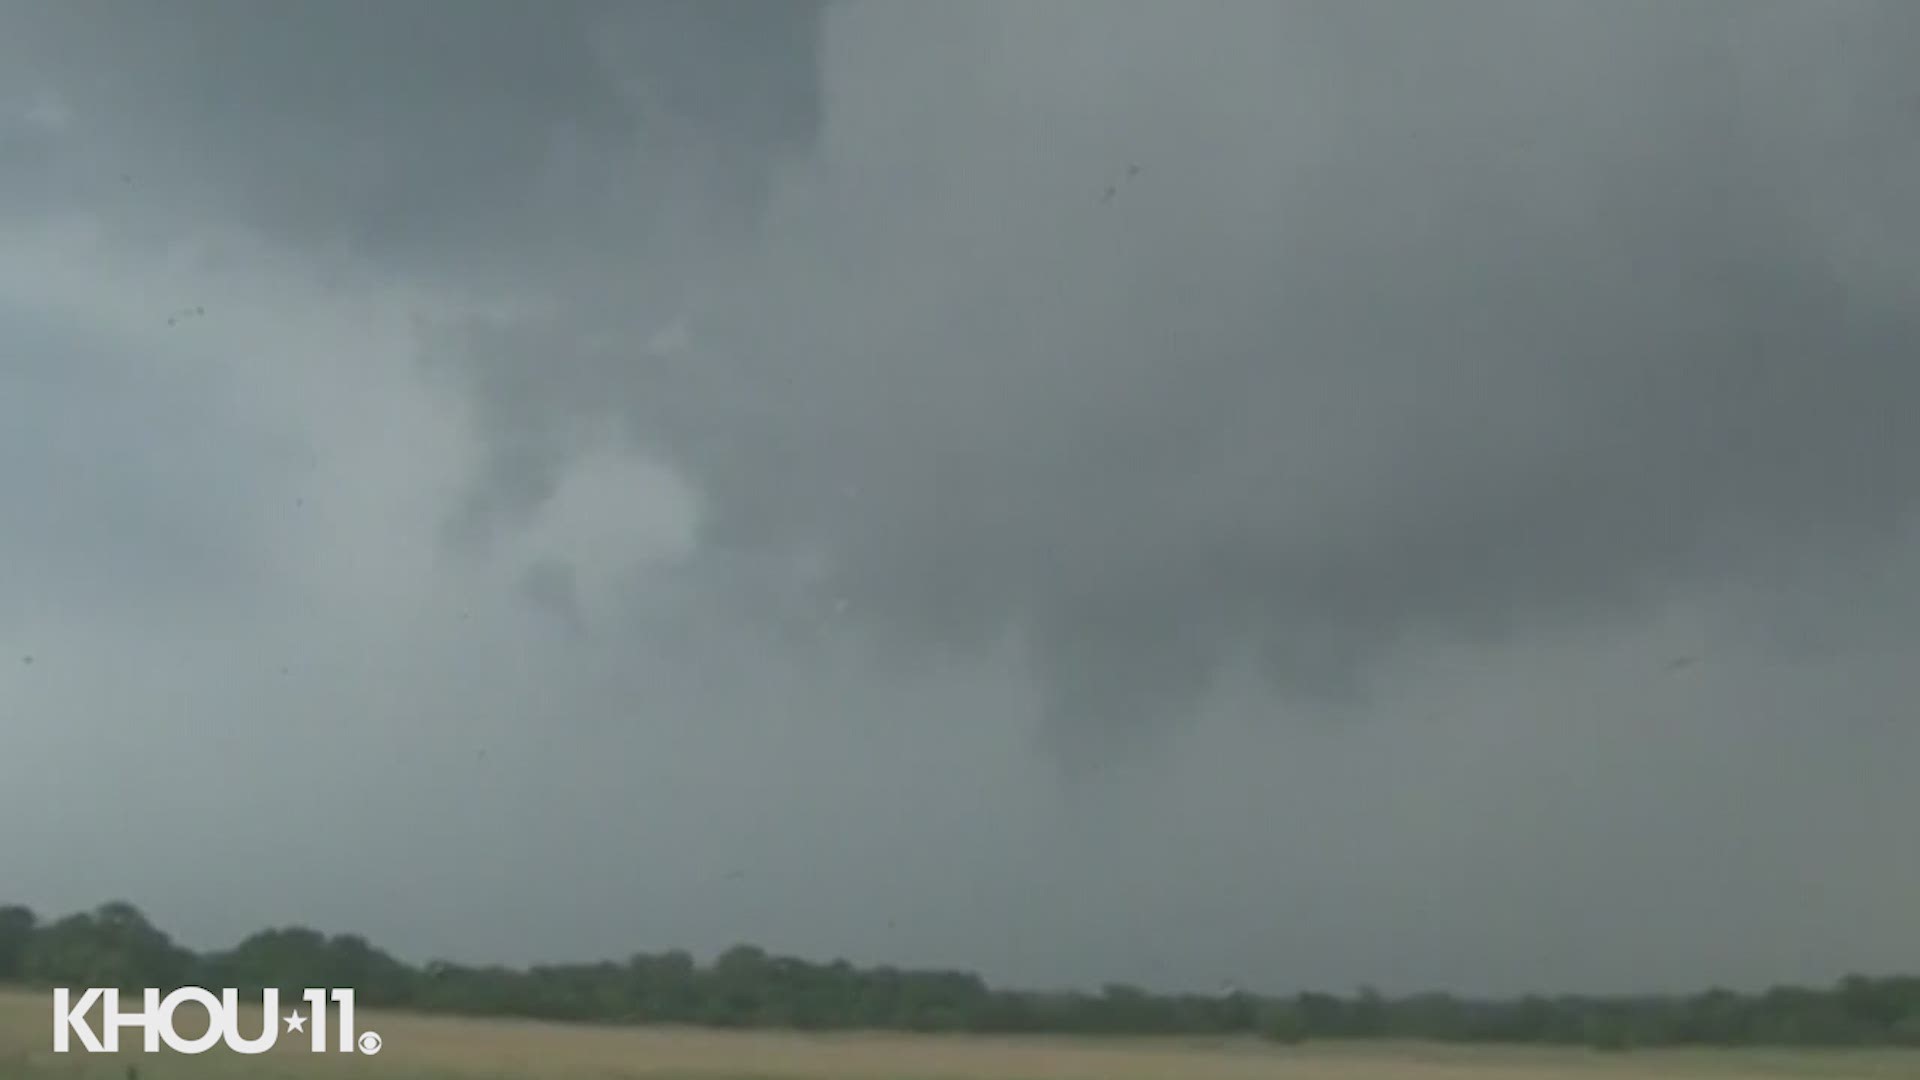 This is video from a storm chaser showing what appears to be a funnel cloud east of Oklahoma City.